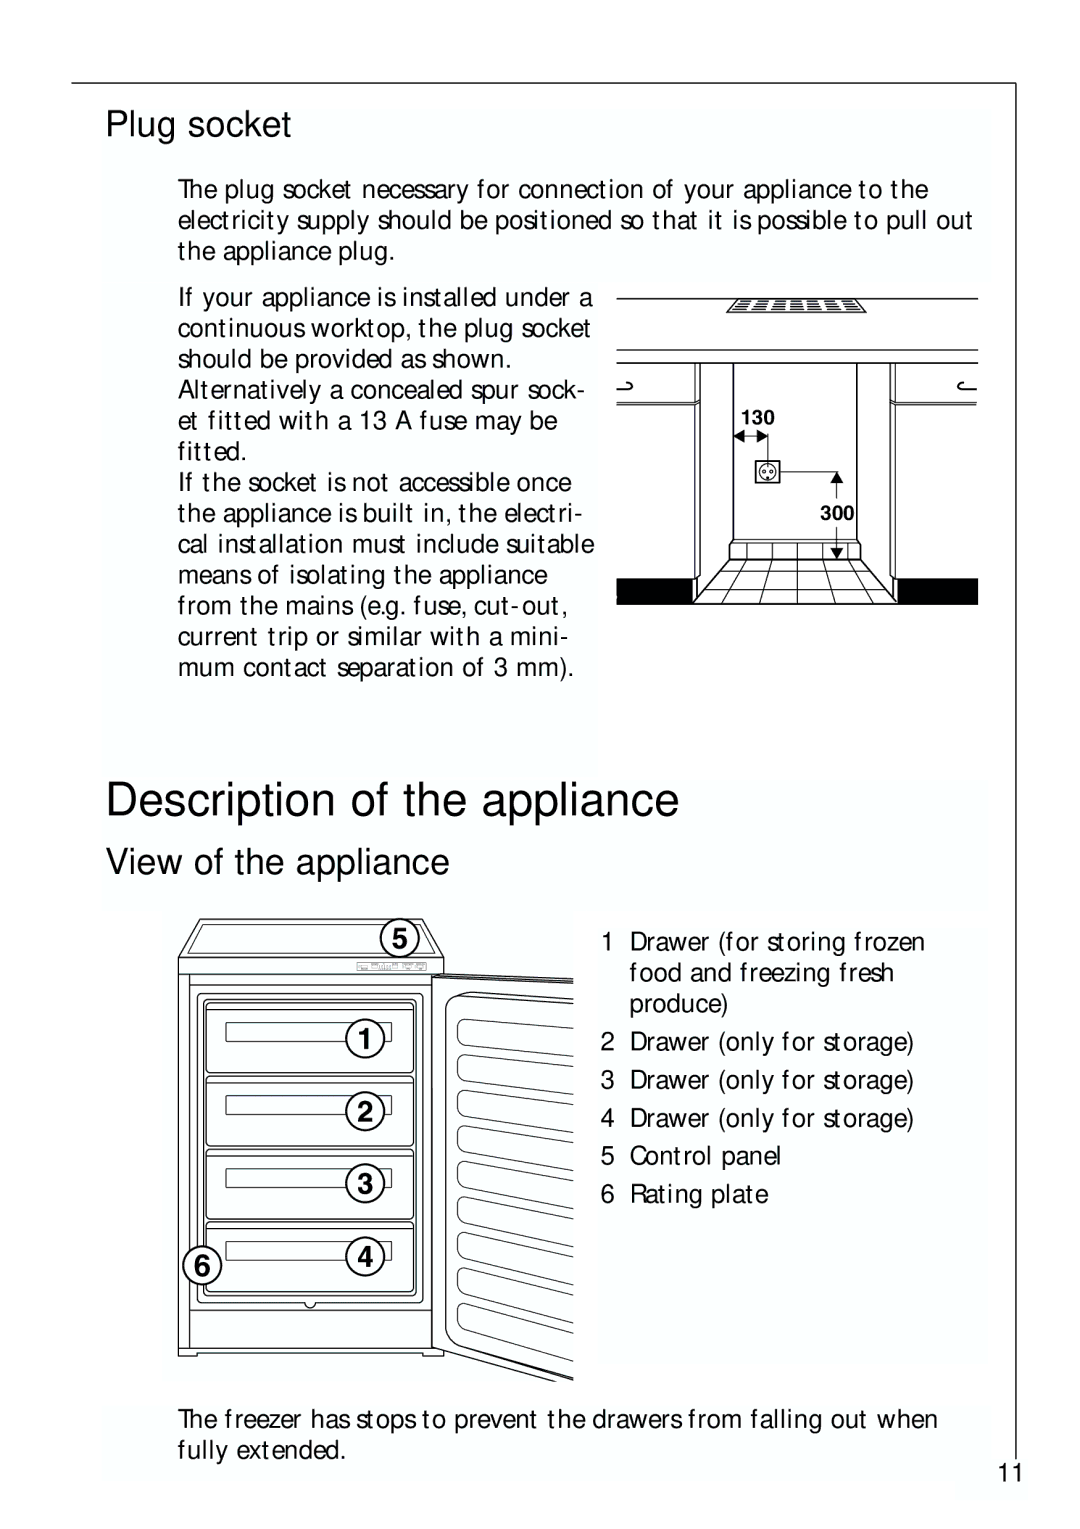 Electrolux ARCTIS 70110 manual Description of the appliance, Plug socket, View of the appliance 